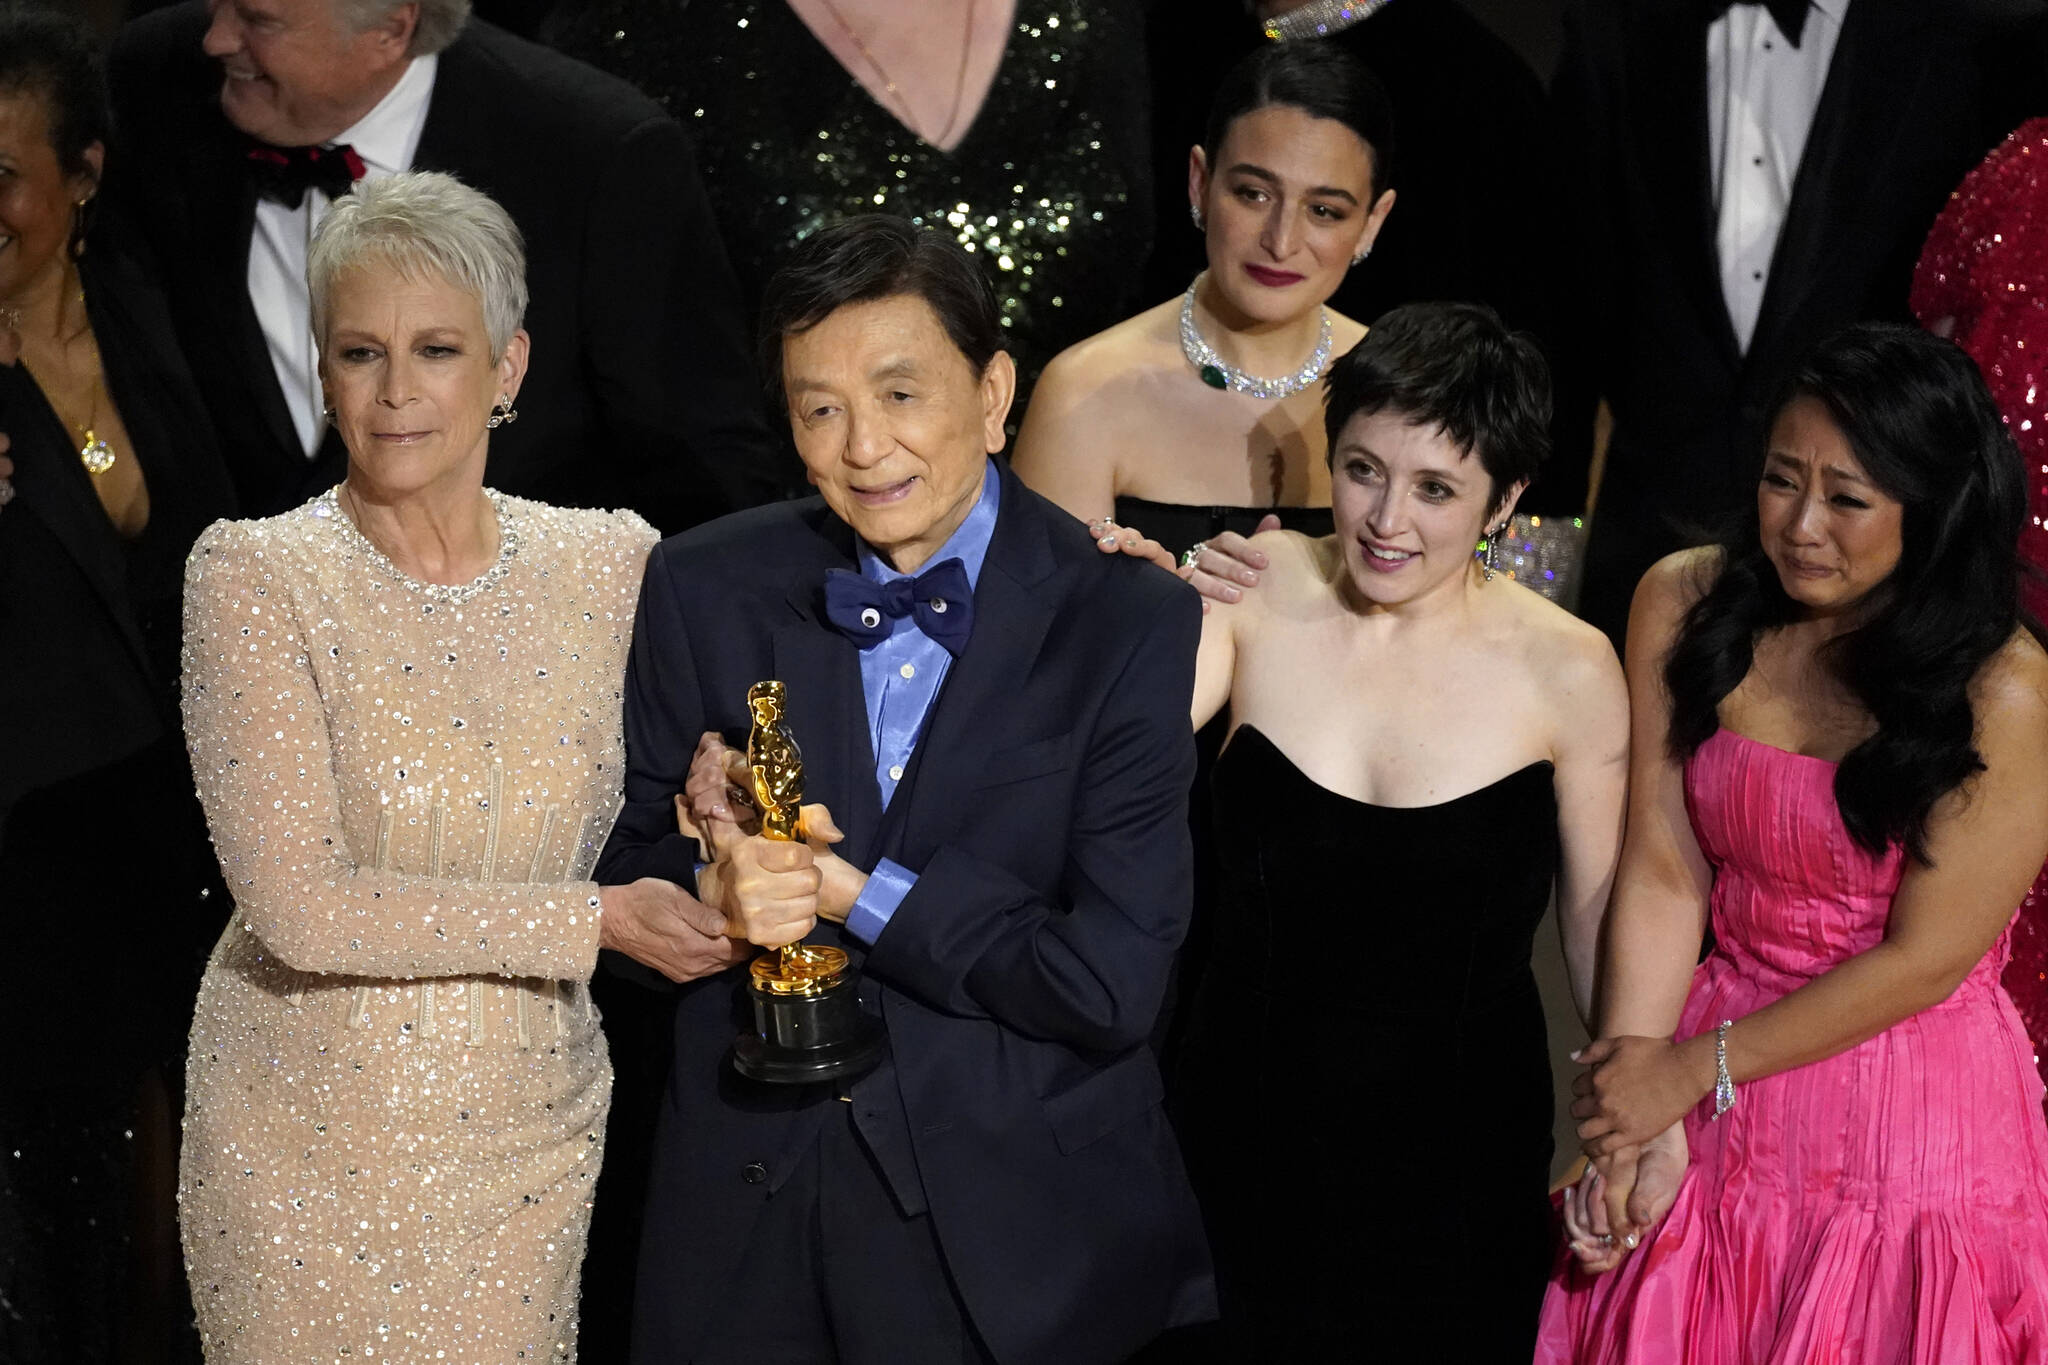 Jamie Lee Curtis, from left, James Hong, Jenny Slate, Tallie Medel and Stephanie Hsu accept the award for best picture at the Oscars on Sunday, March 12 at the Dolby Theatre in Los Angeles. (AP Photo/Chris Pizzello)